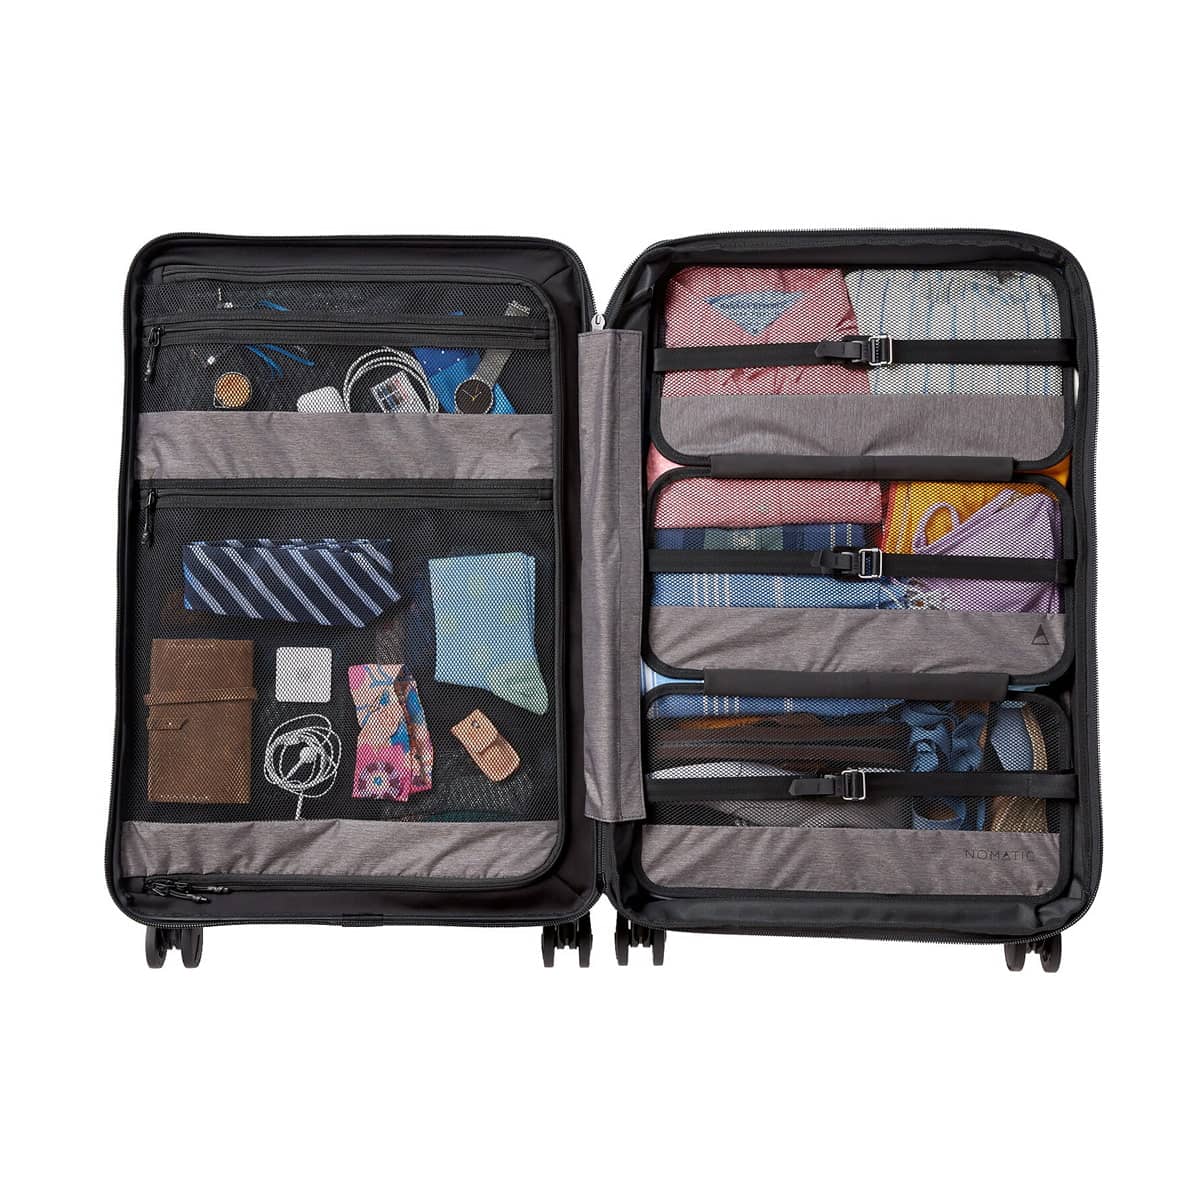 Best checked luggage for men